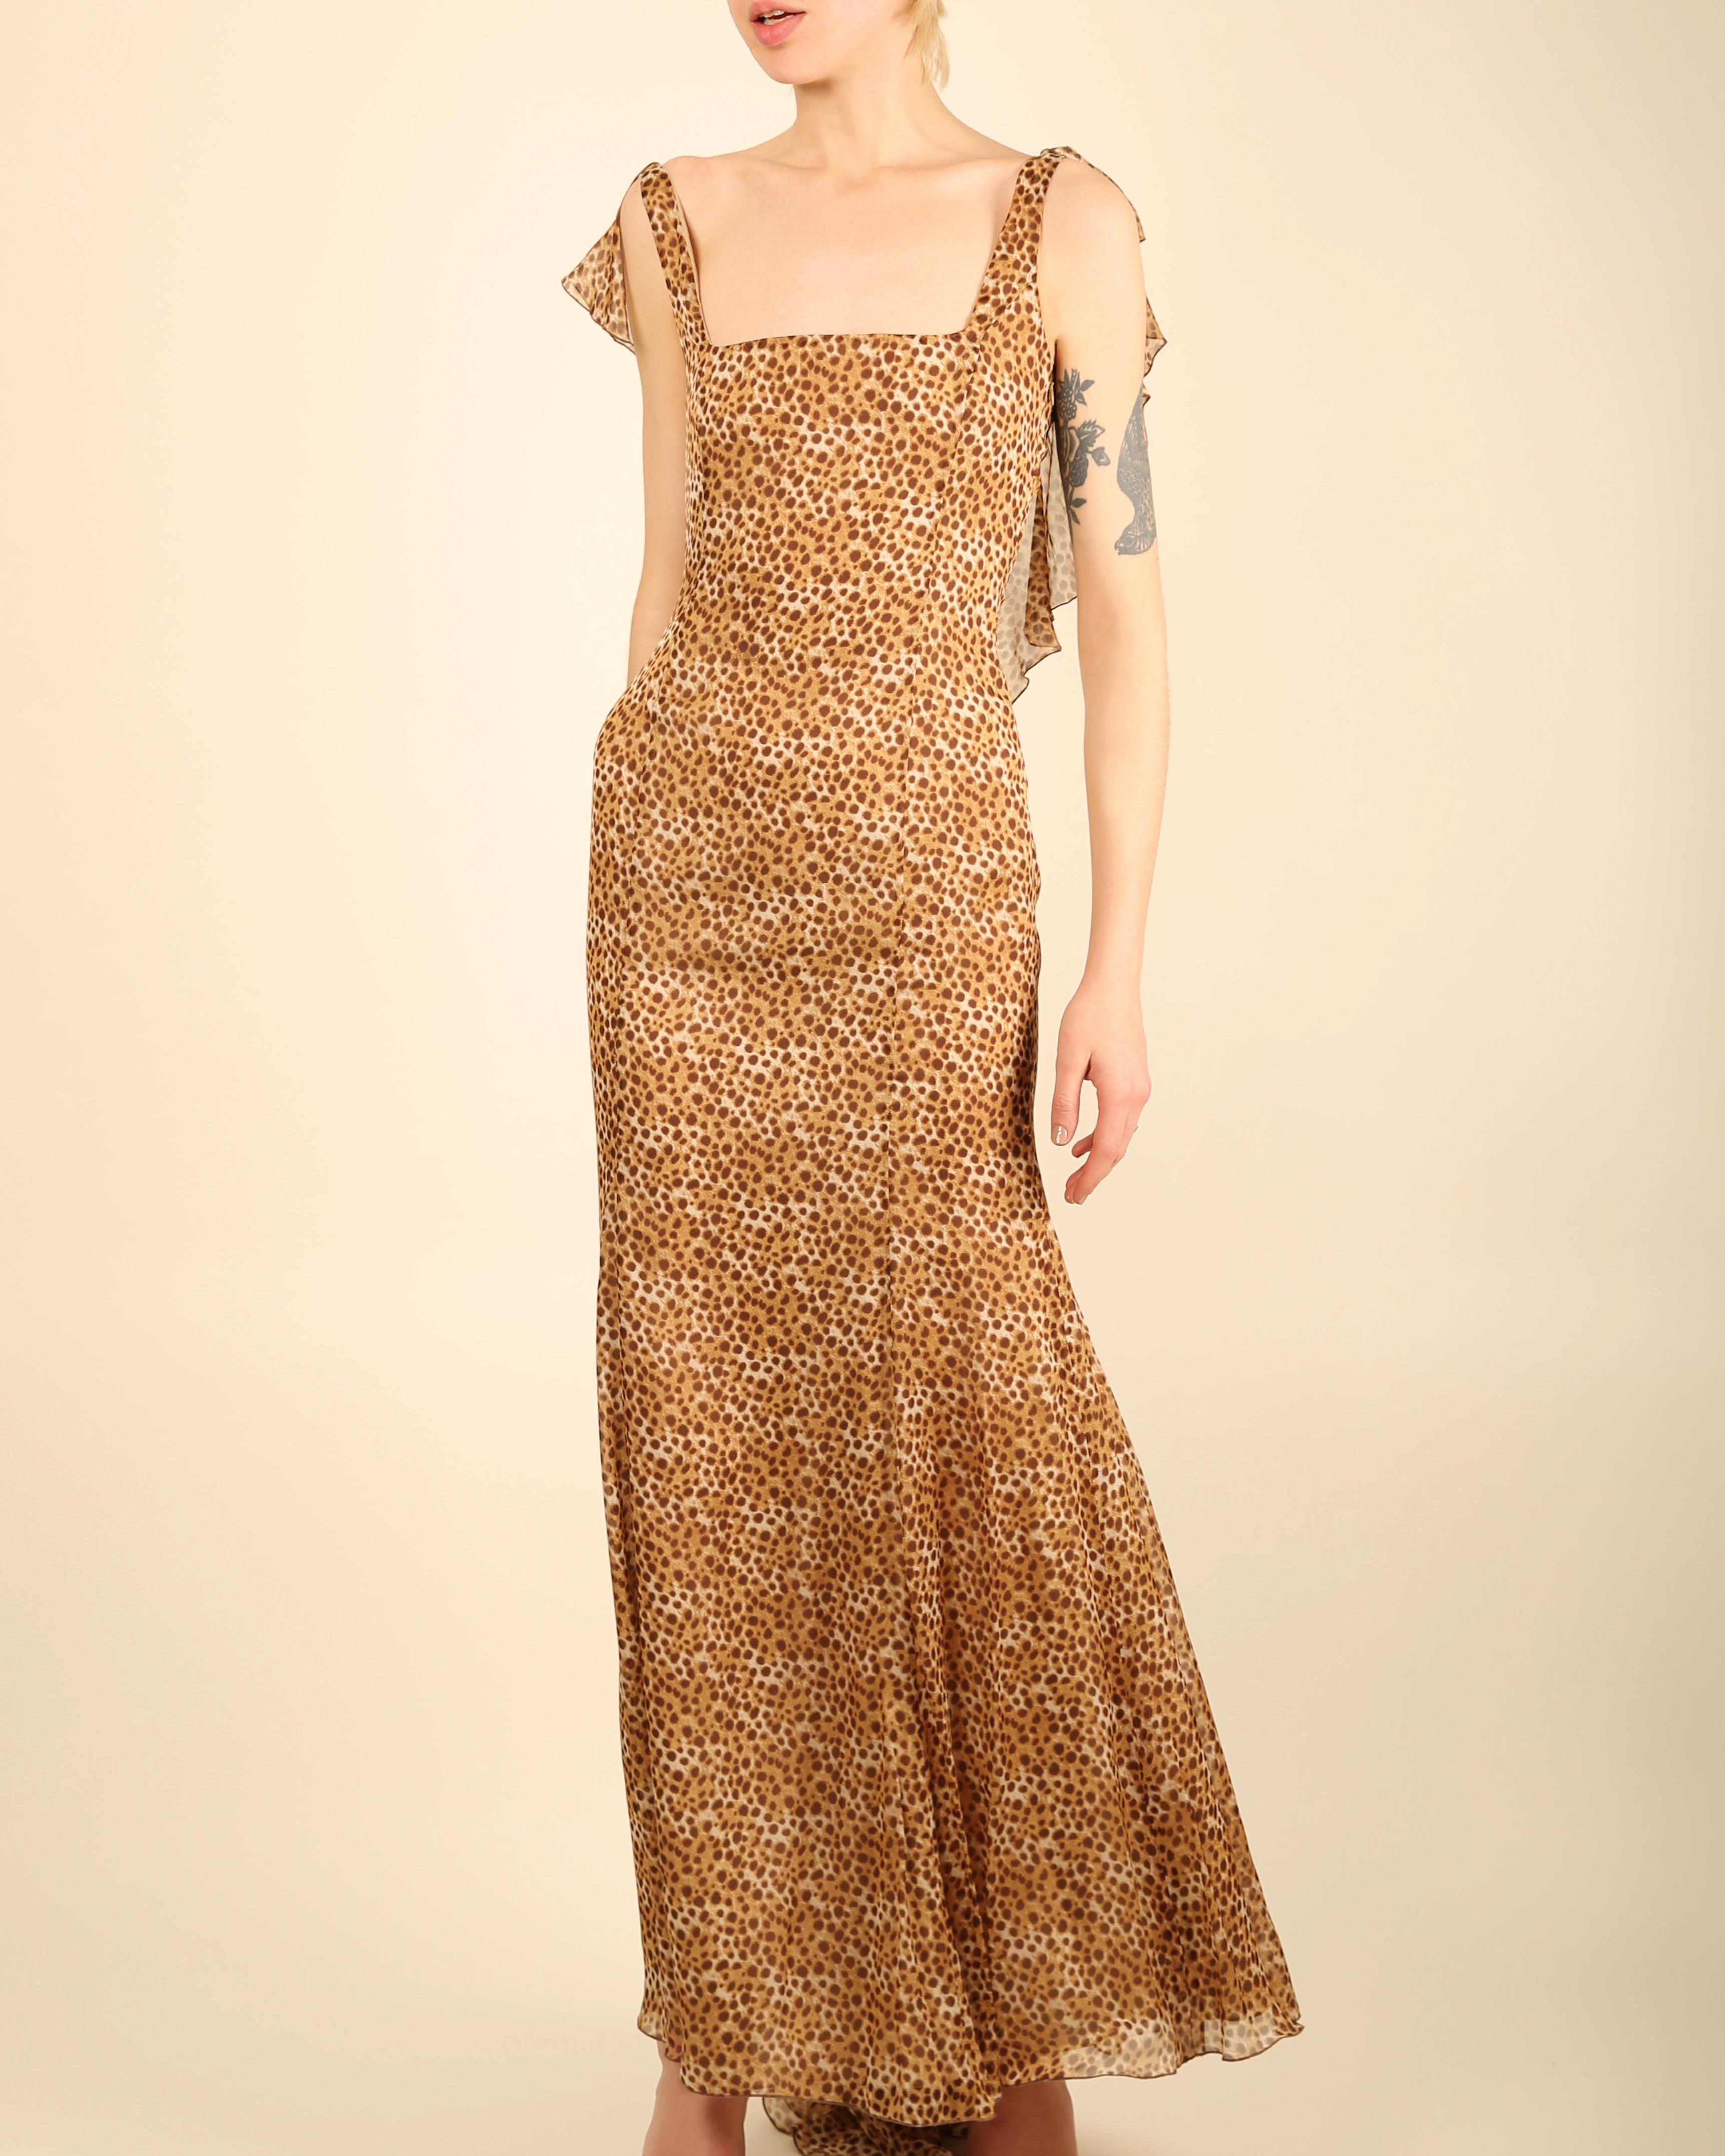 Valentino circa 1990 vintage sleeveless brown leopard print backless dress gown 5